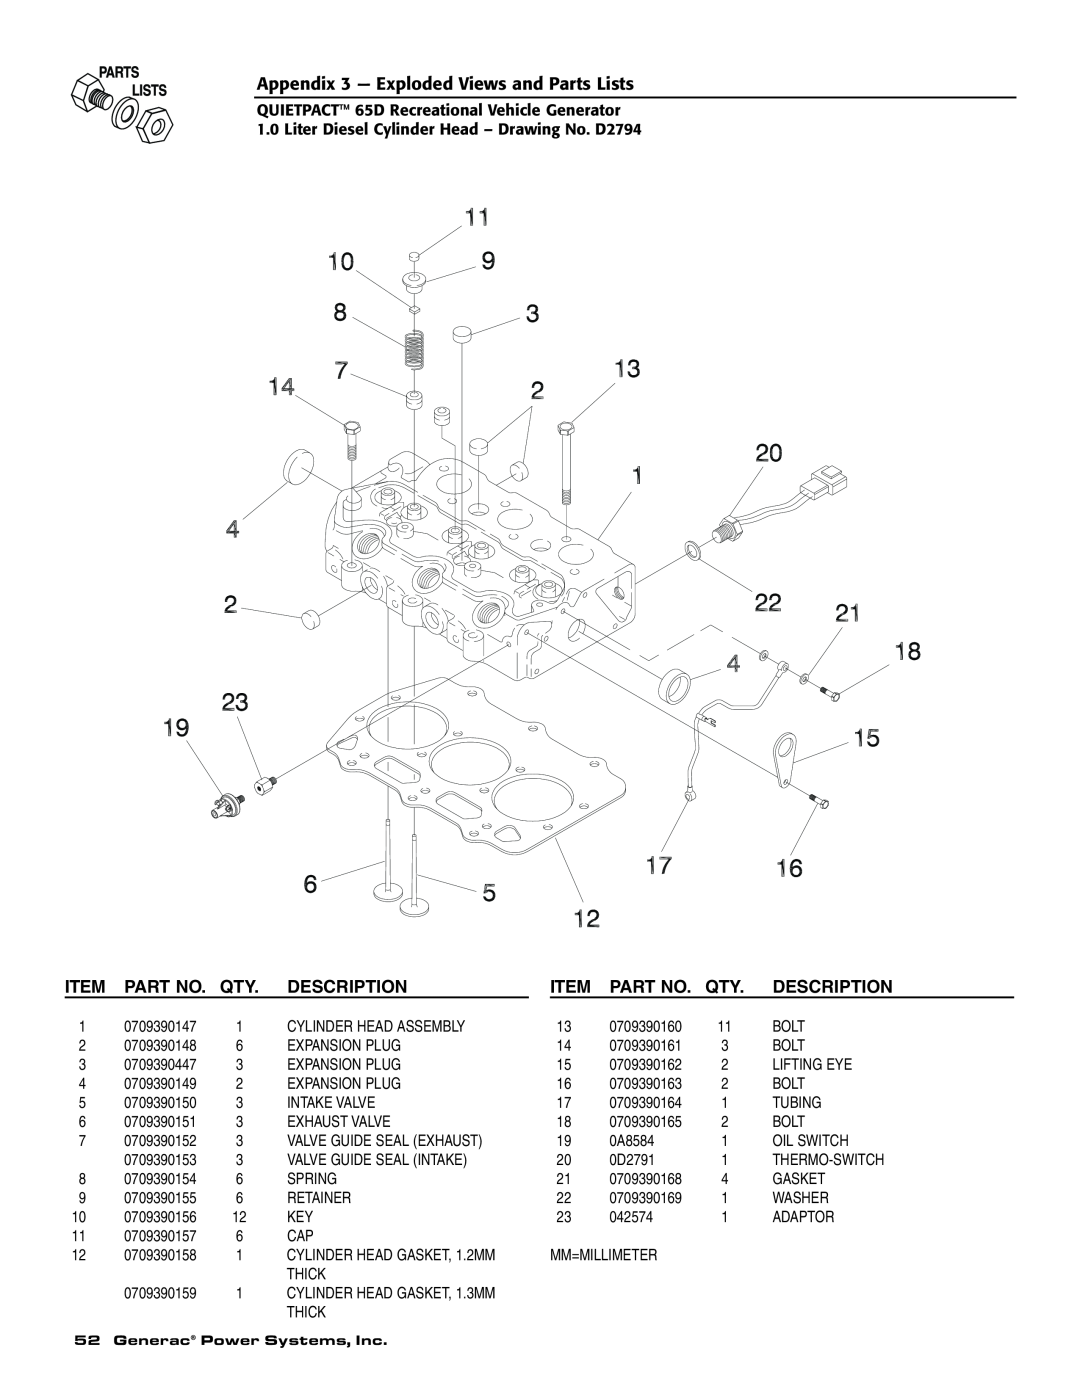 Generac 004614-1 owner manual Appendix 3 - Exploded Views and Parts Lists, Description, CYLINDER HEAD GASKET, 1.2MM 